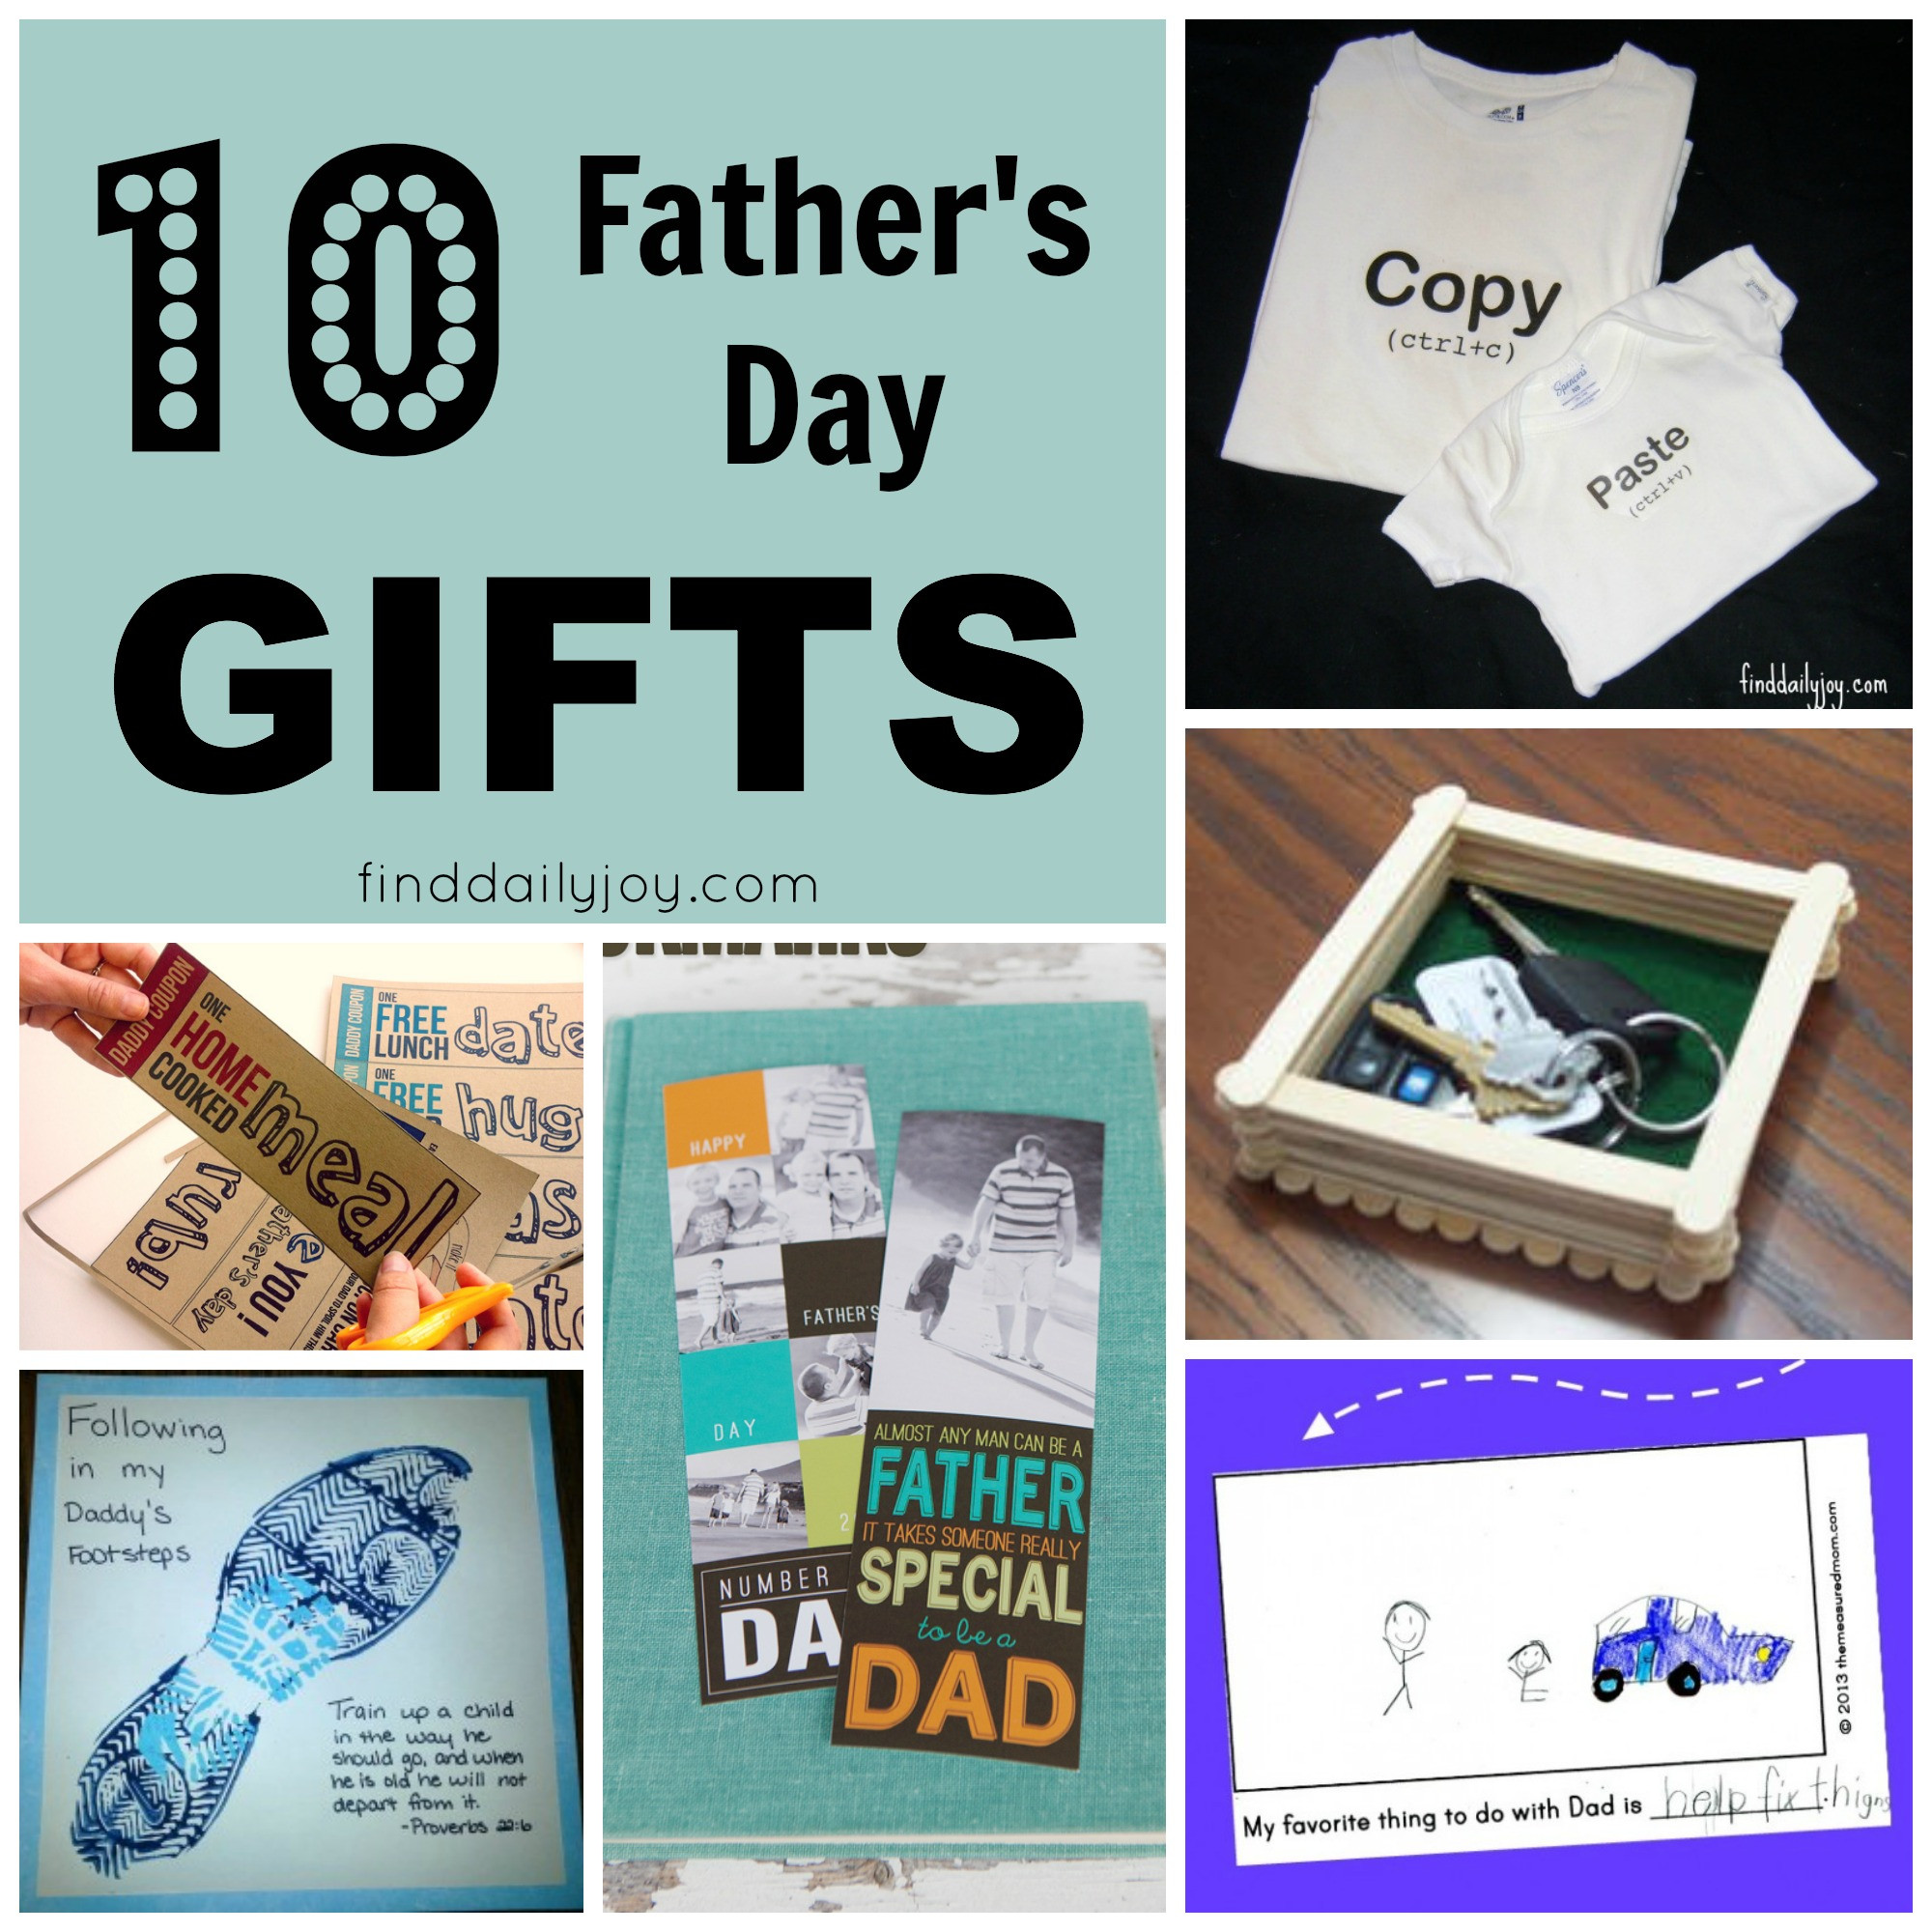 Fathers Day Church Gift Ideas
 10 Father’s Day Gifts